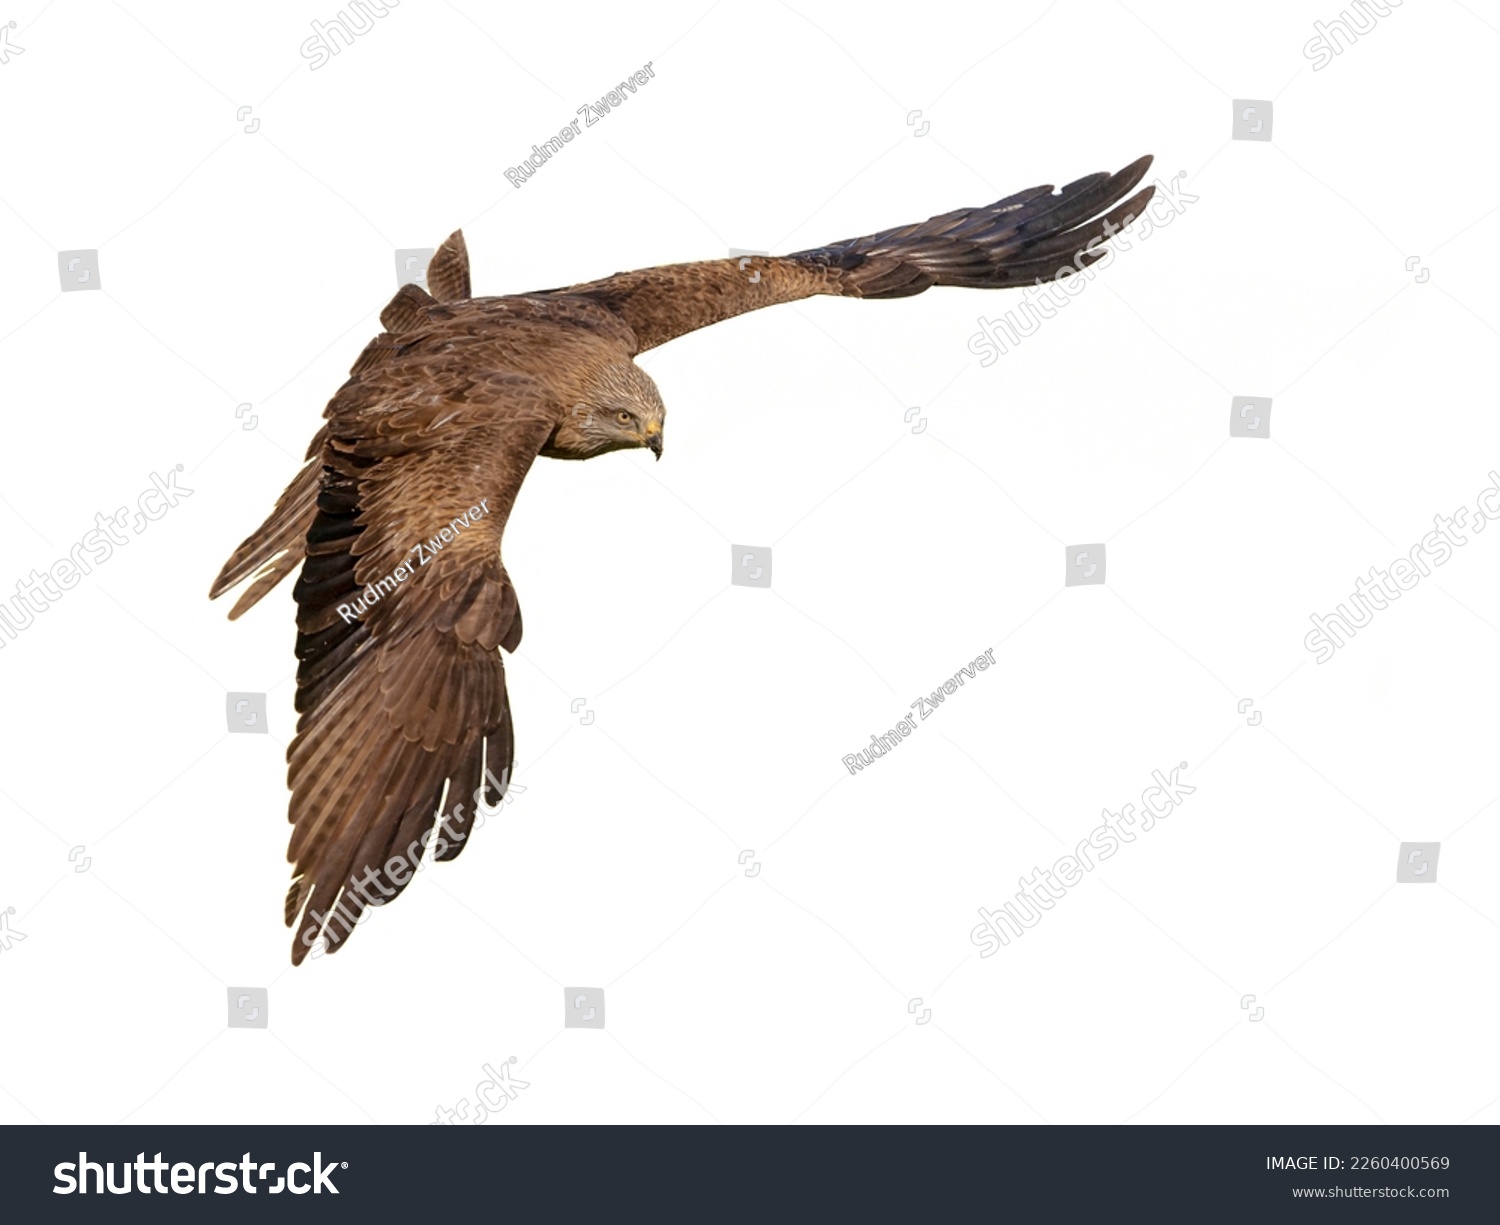 Black Kite (Milvus migrans) is a medium-sized bird of prey of the Old World. It occurs from Europe to Australia and Africa to Japan. Raptor in flight. Wildlife scene of nature with white background. #2260400569